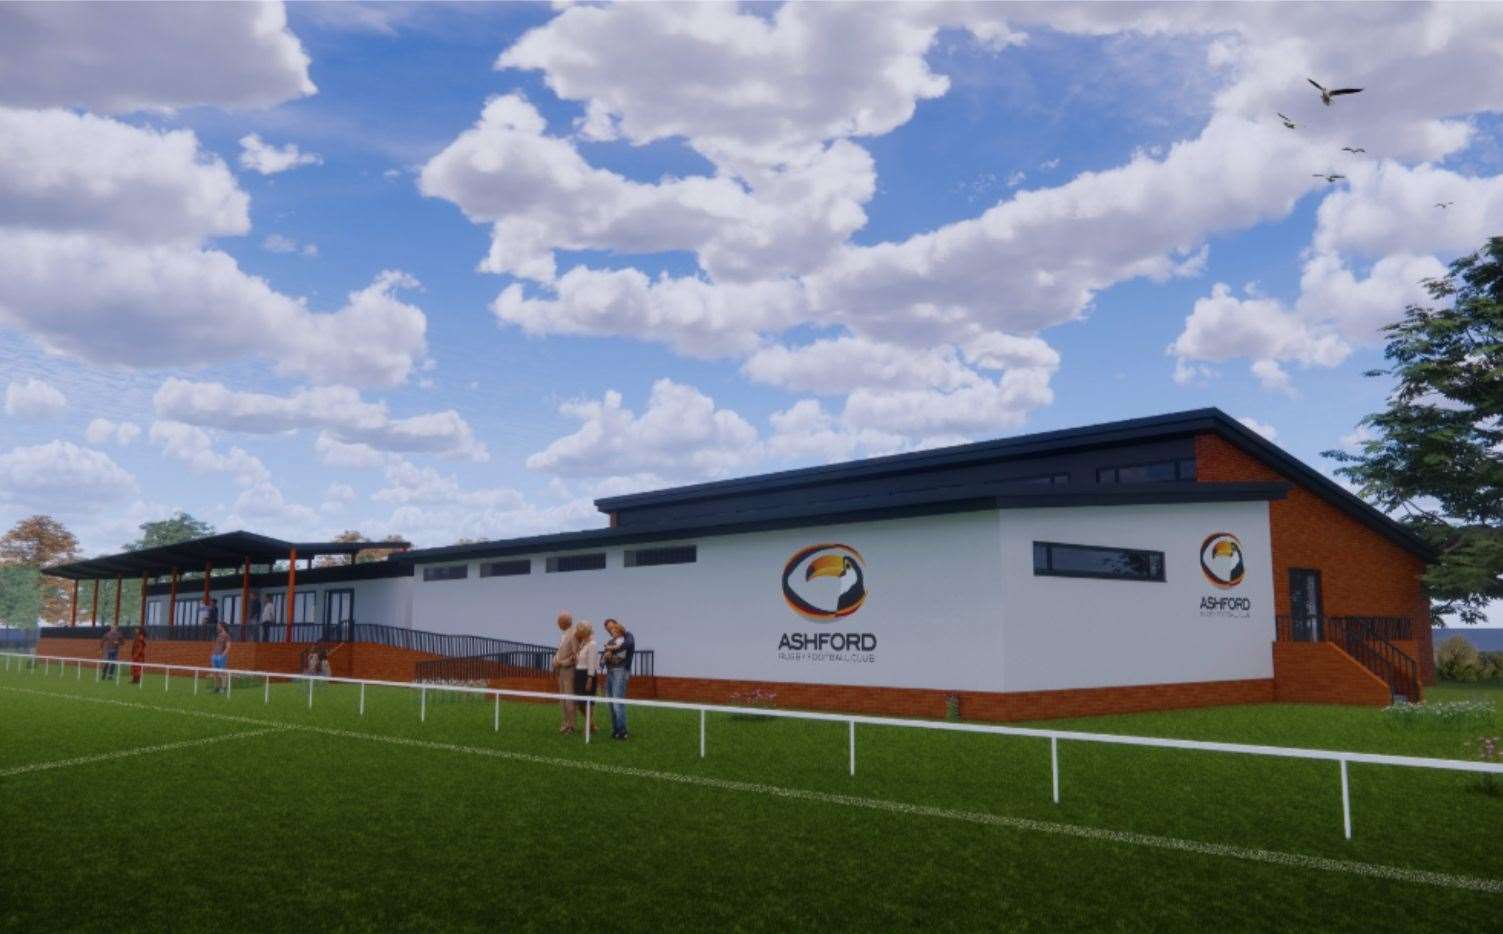 The Ashford sports club wants to “grow and improve”. Picture: ARFC